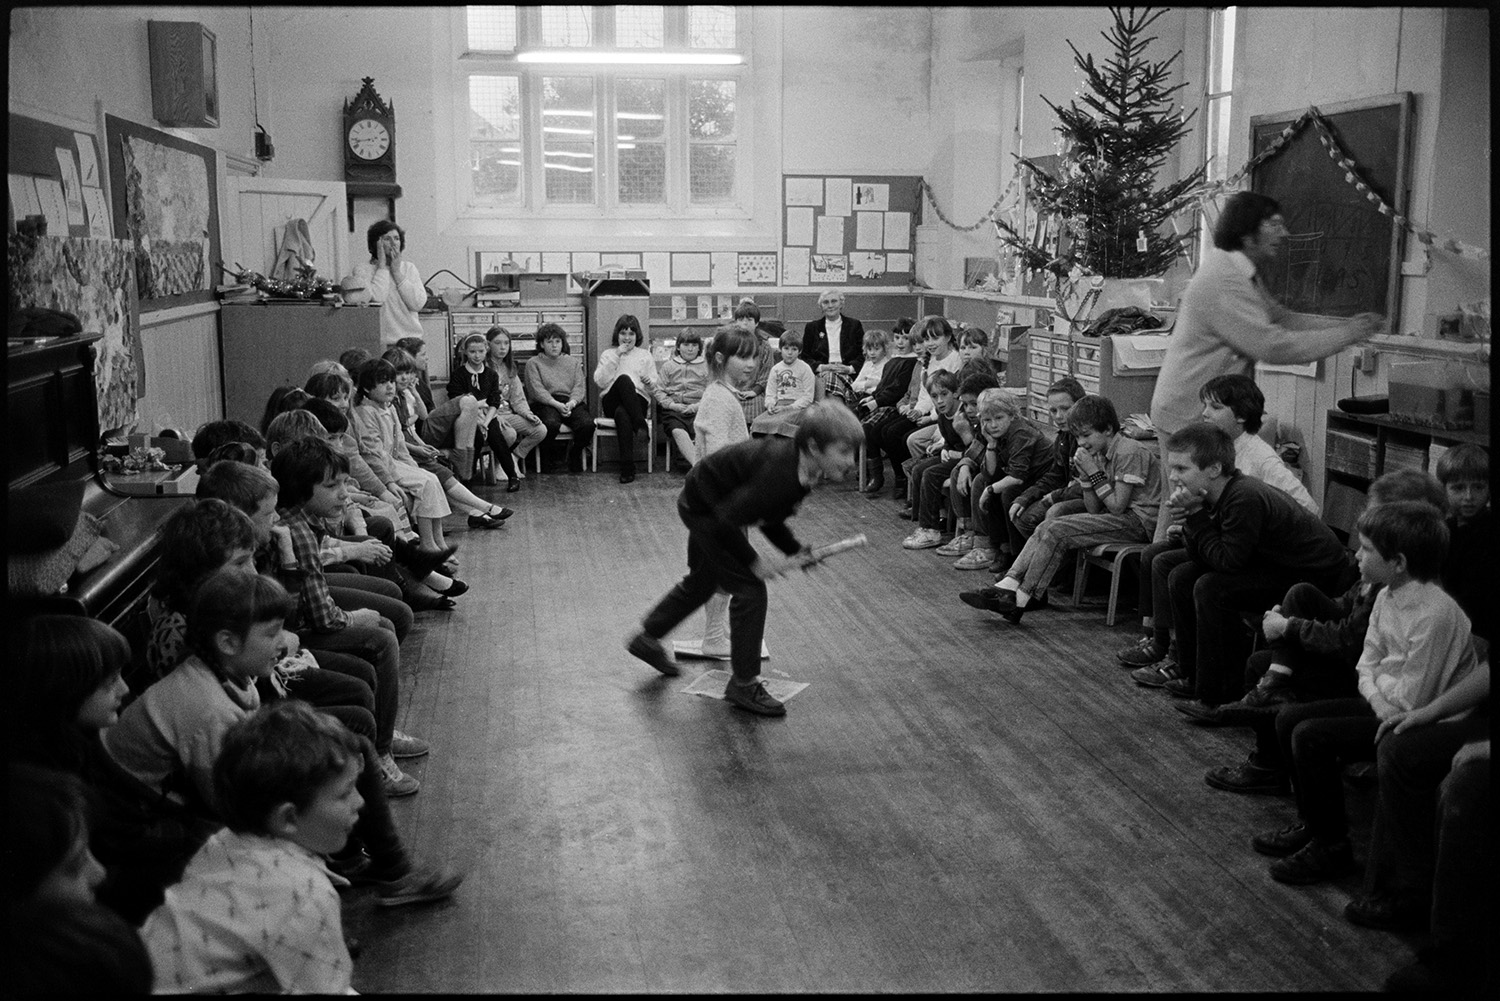 Christmas end of term party in primary school, games, teacher talking to pupils.
[A Christmas end of term party at Chulmleigh Primary School. The teachers, including Mr Sampson and Mrs Harris are organising games for pupils in the classroom, who are sitting on chairs around the room. There are paper chains, a Christmas tree, and decorations around the classroom.]